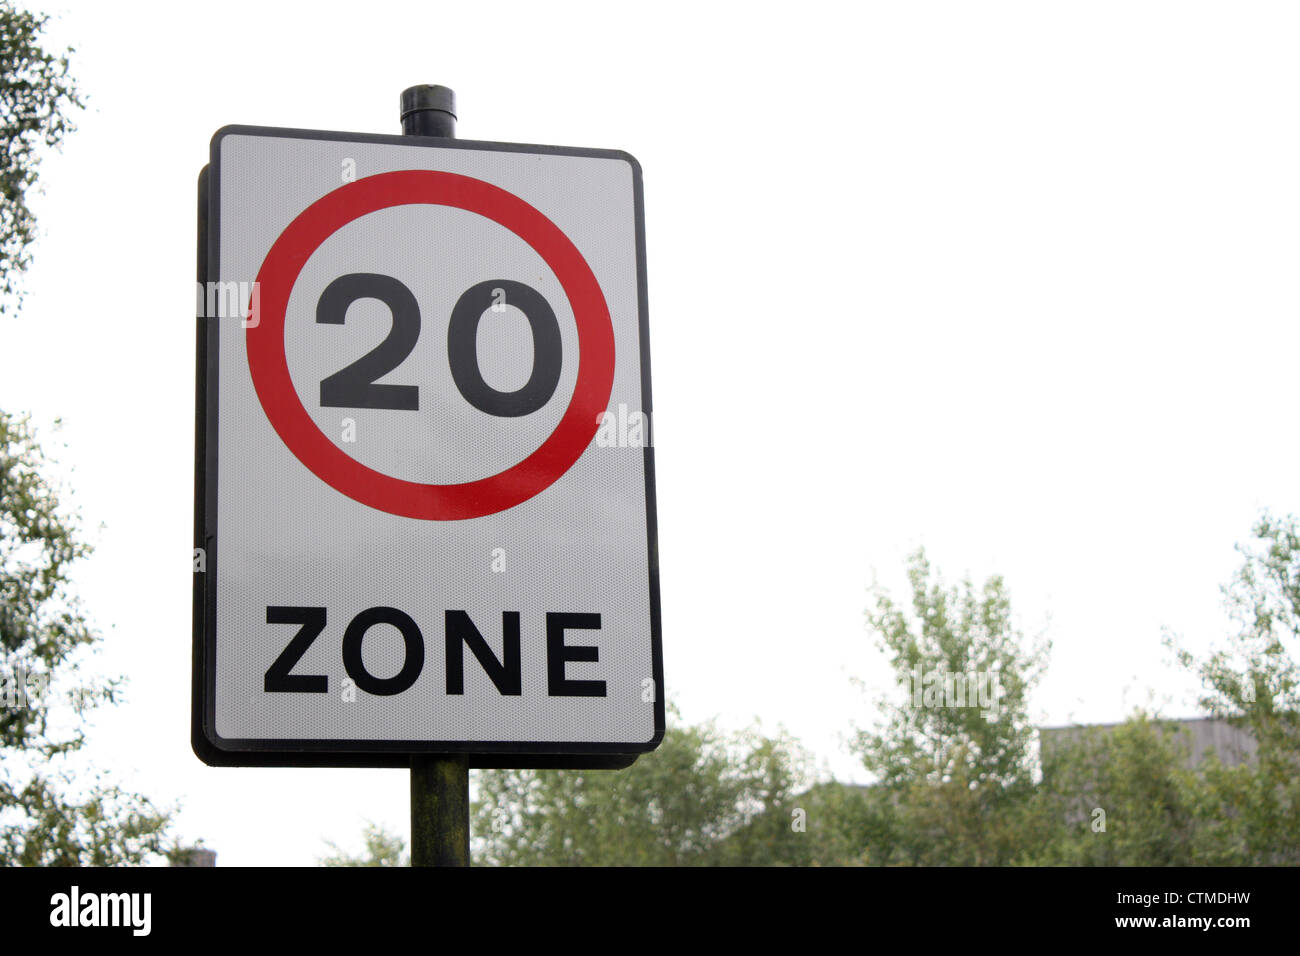 A 20 zone sign for the speed limit. Stock Photo